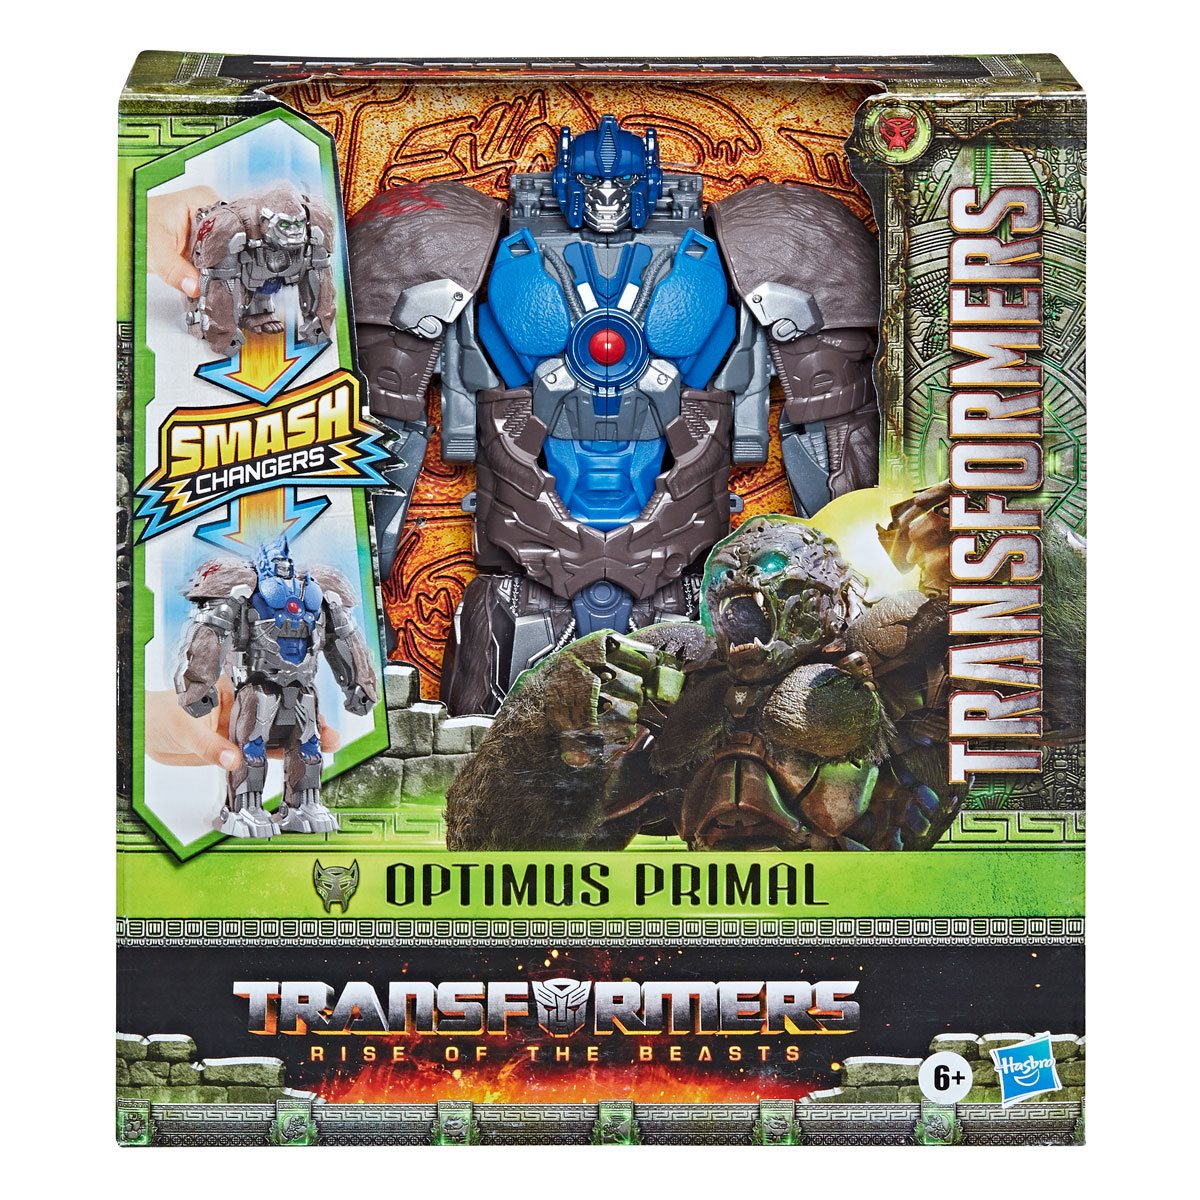 Transformers Rise of the Beasts Optimus Primal Smash Changers 9-Inch Action Figure Toy in a box front voew - Heretoserveyou